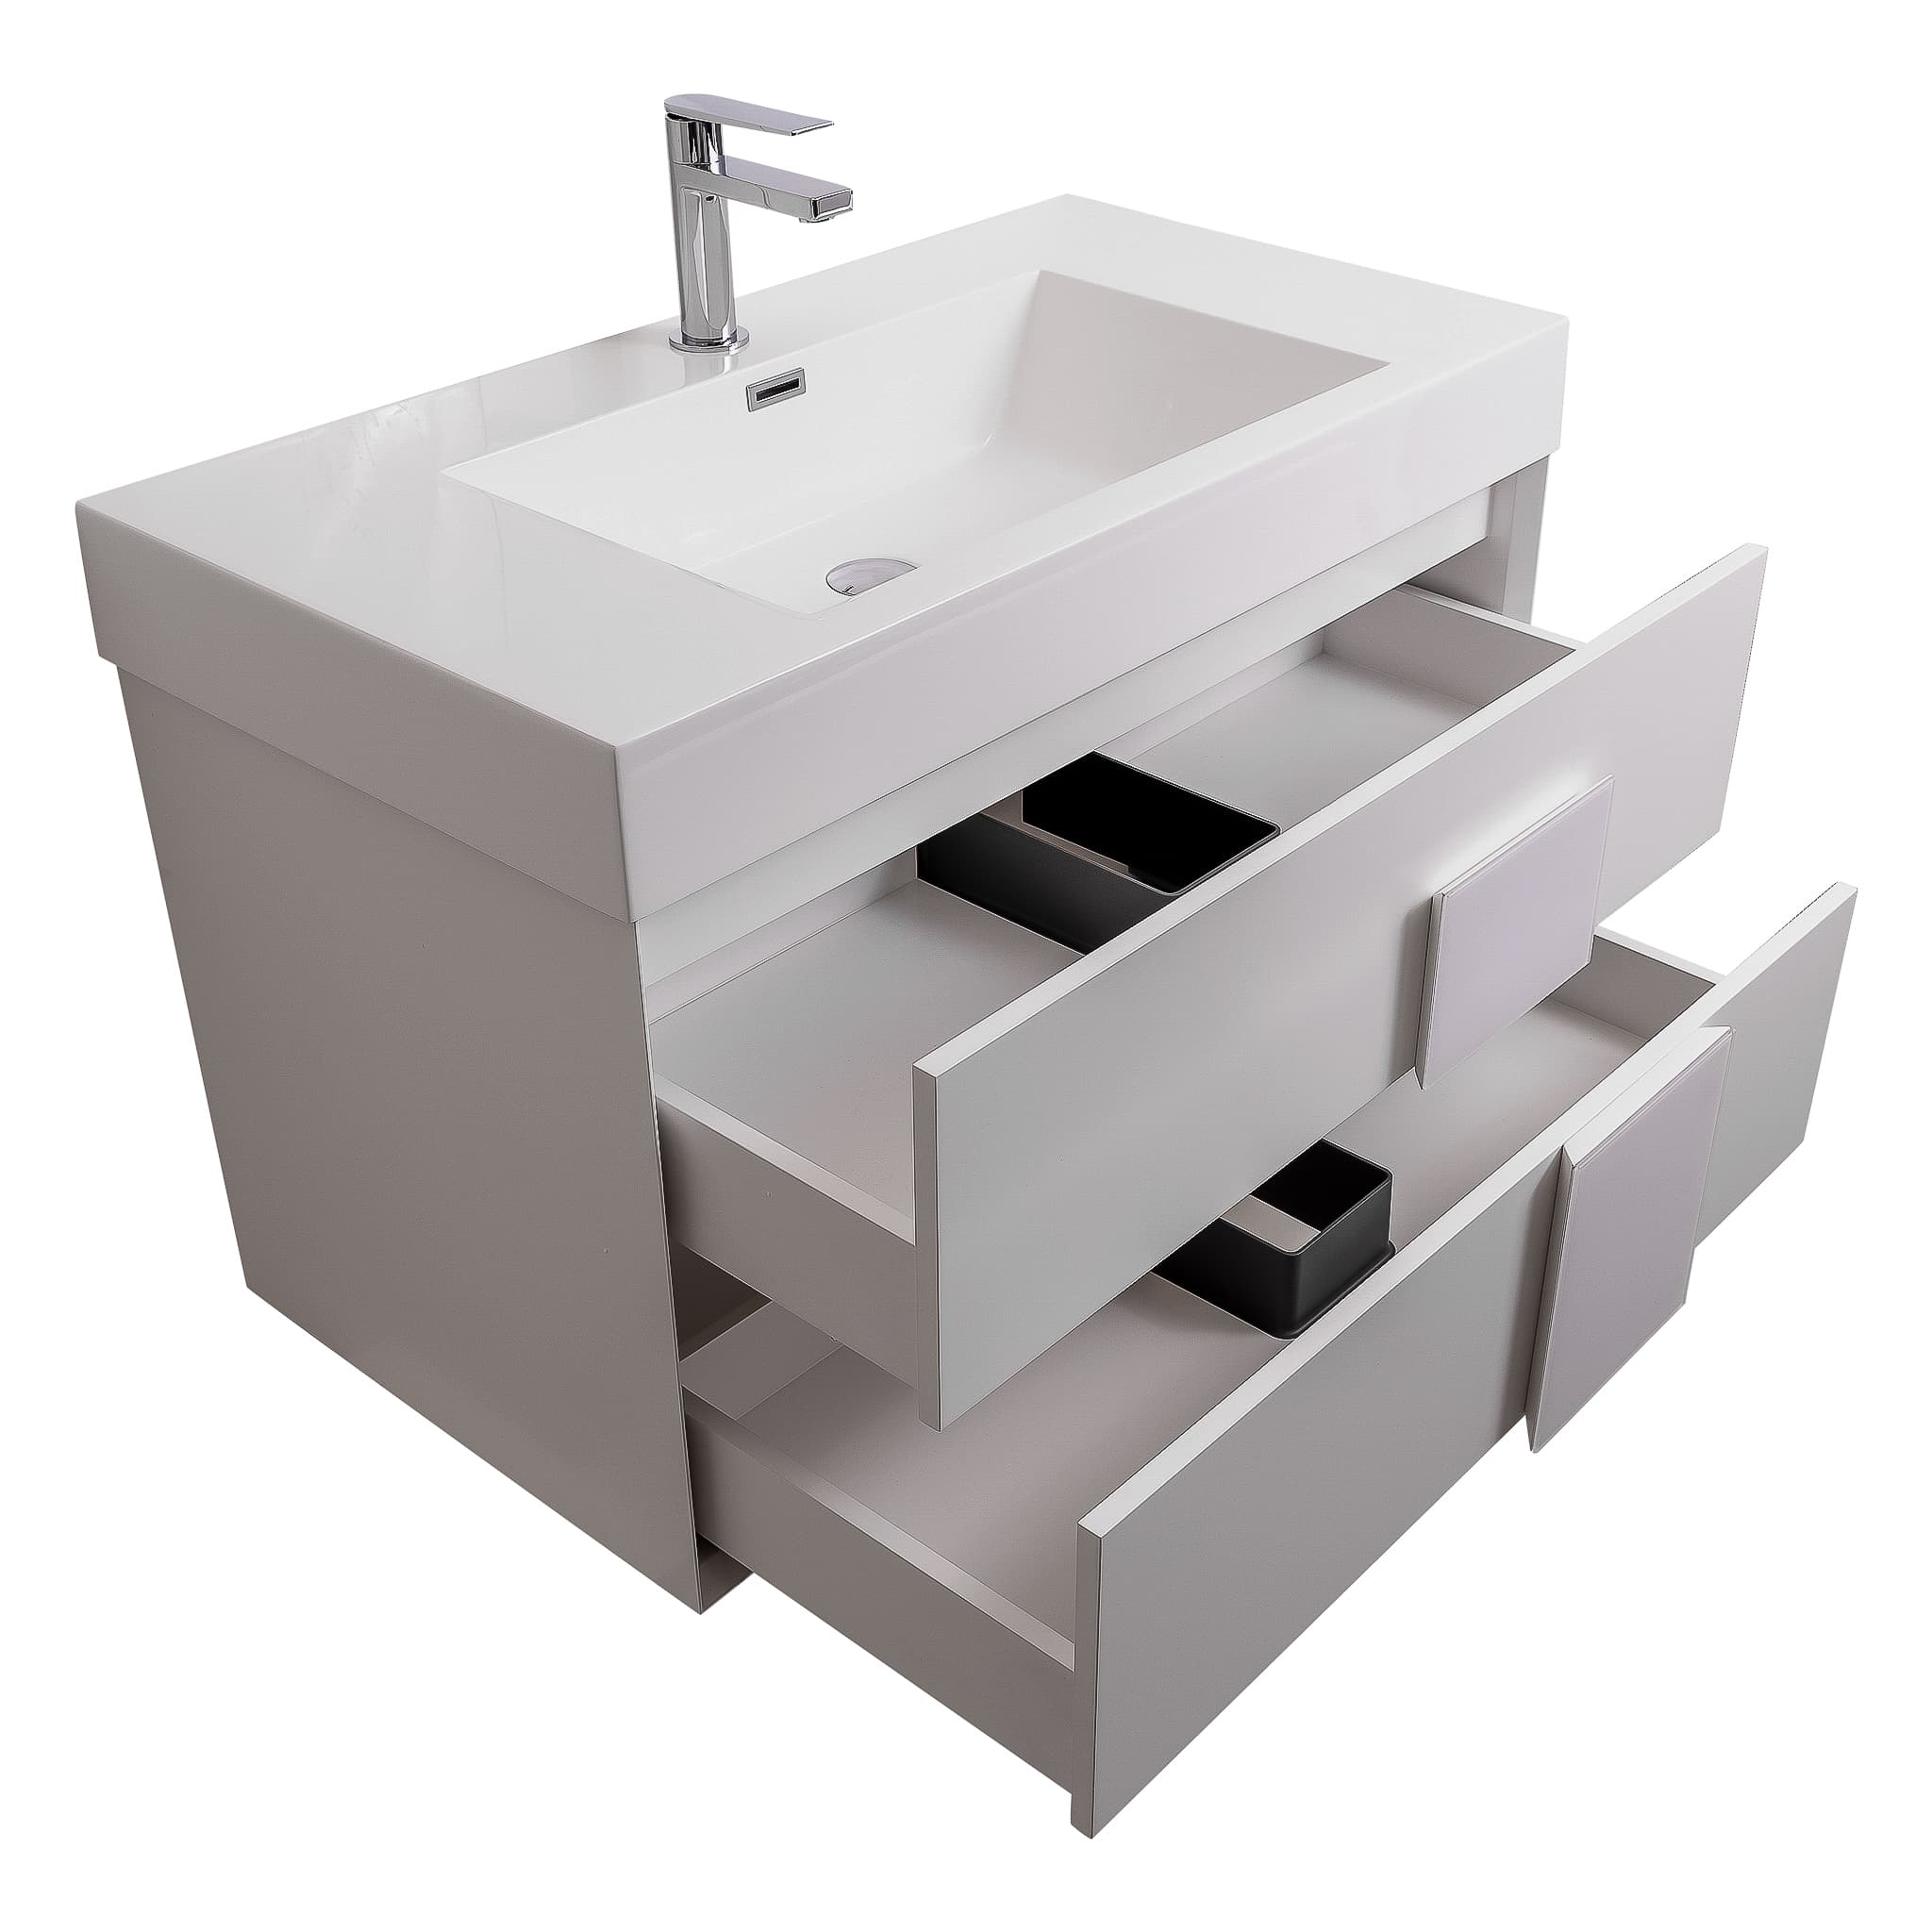 Piazza 31.5 Matte White With White Handle Cabinet, Square Sink, Wall Mounted Modern Vanity Set